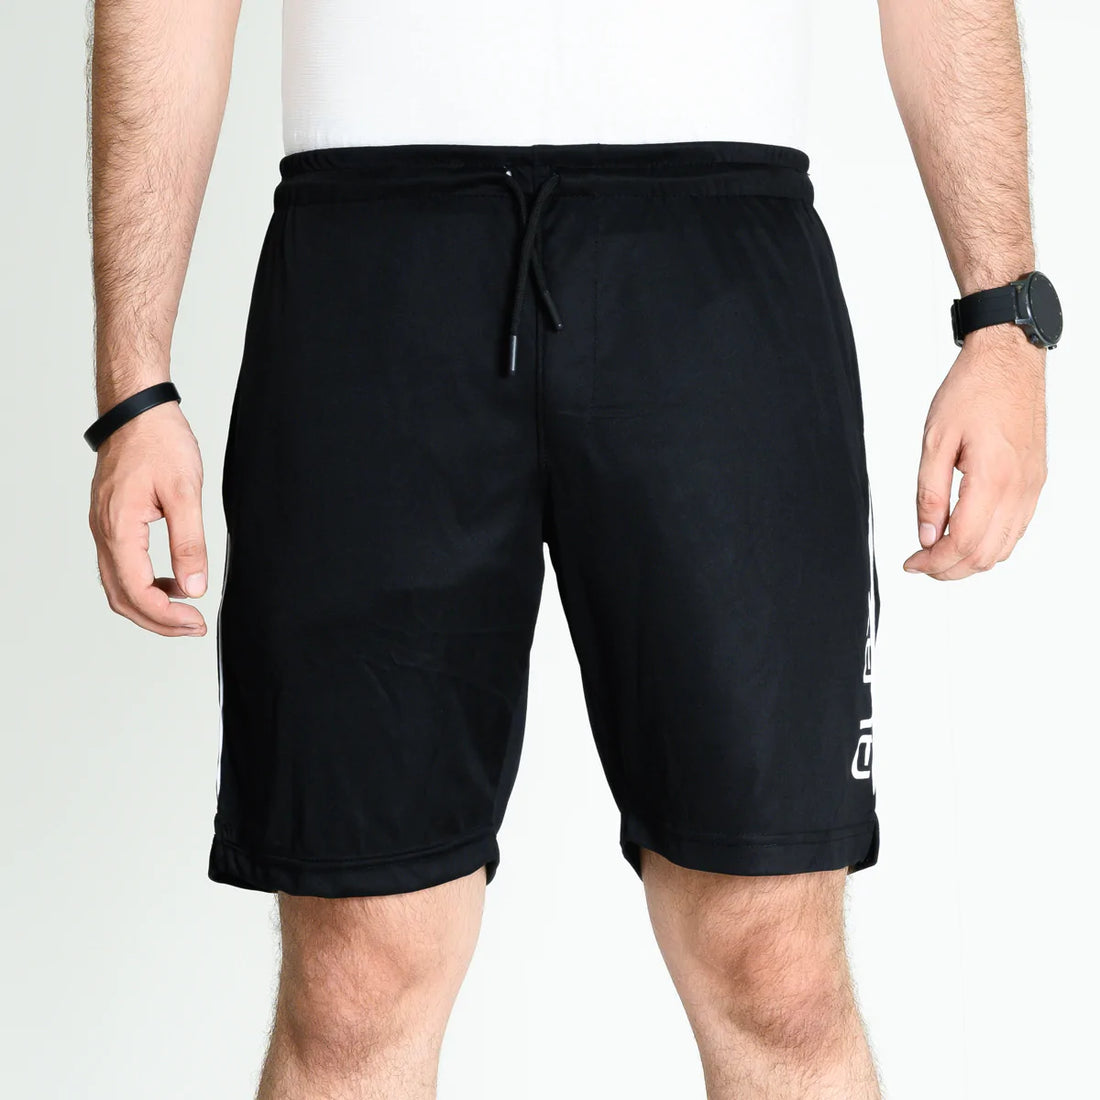 What are Training Shorts used for?